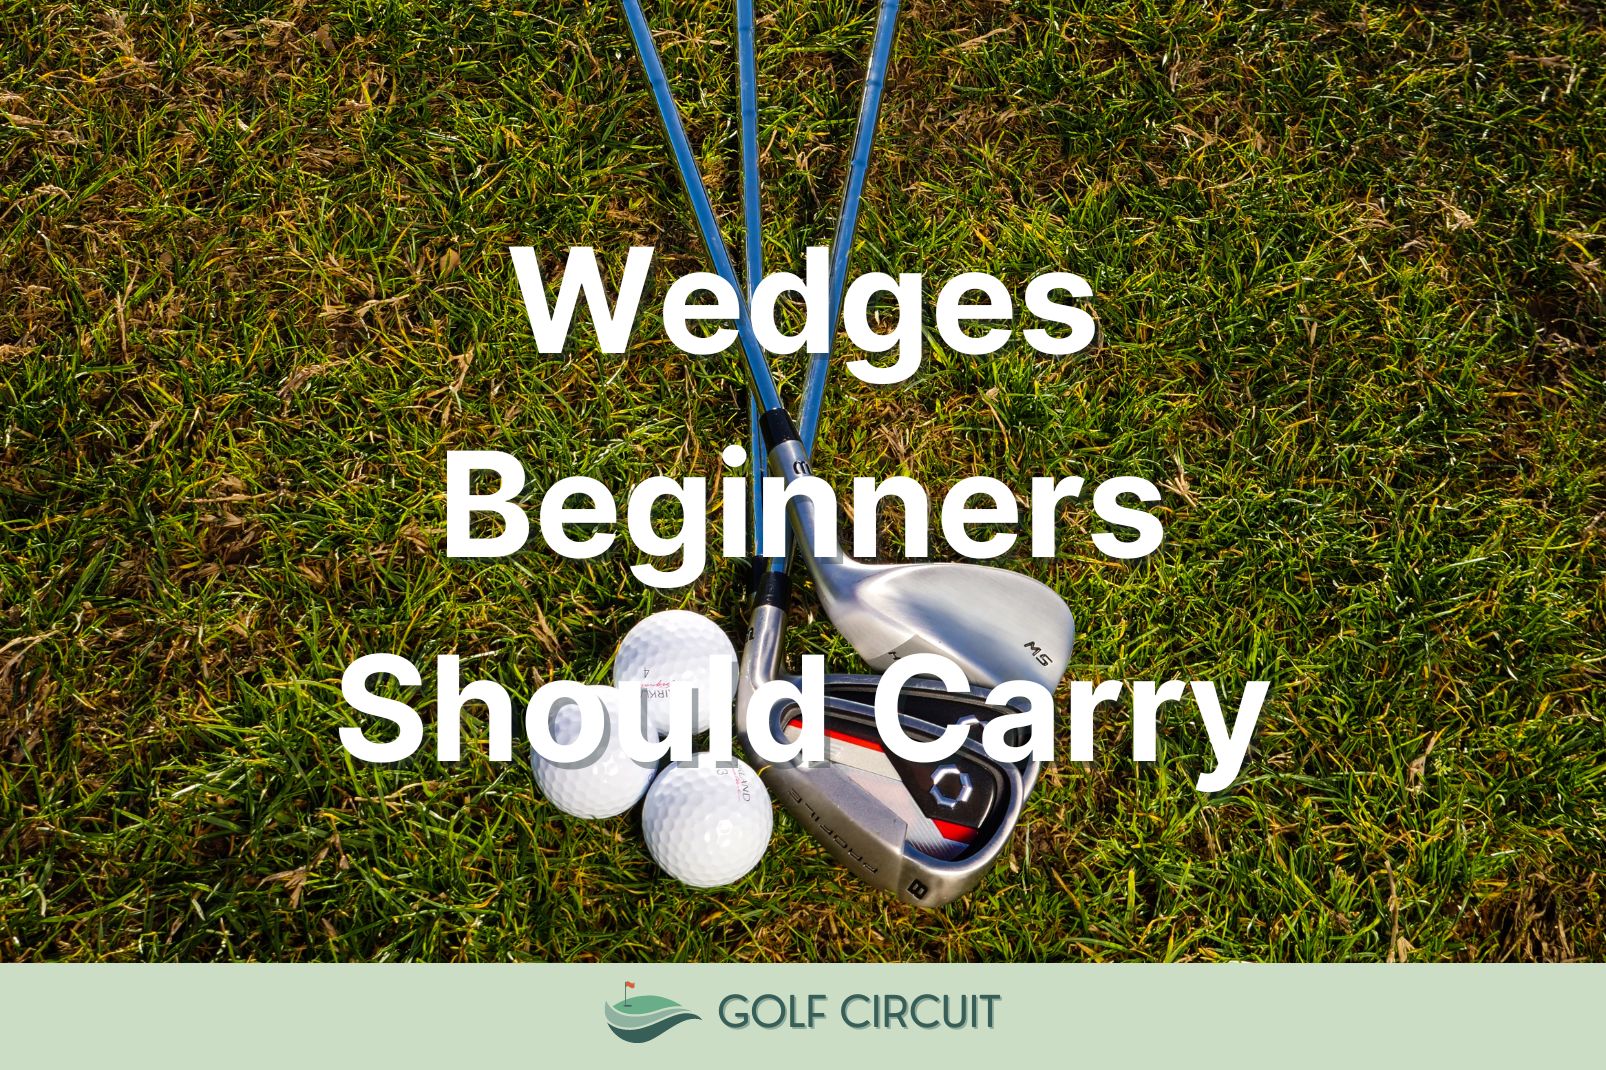 what wedges should a beginner carry